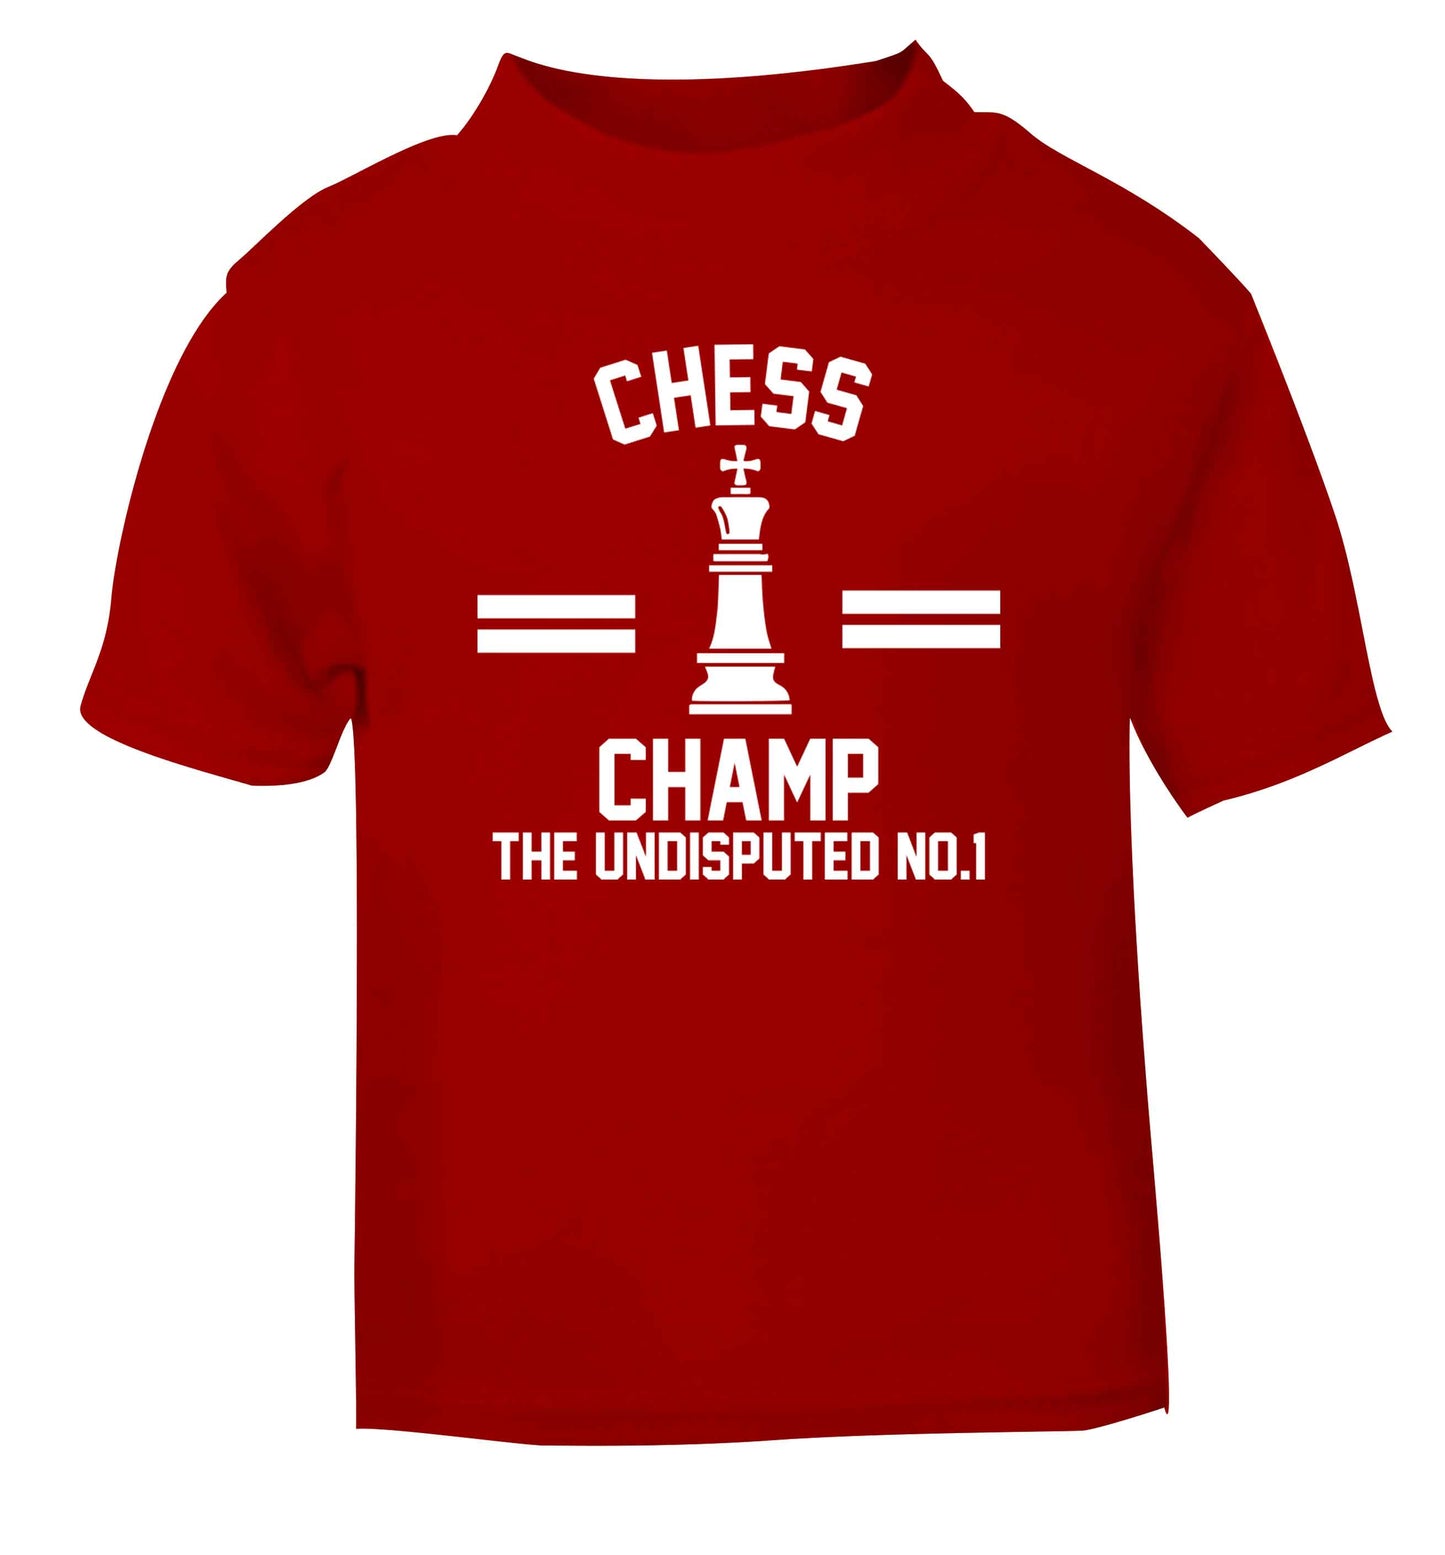 Undisputed chess championship no.1  red Baby Toddler Tshirt 2 Years